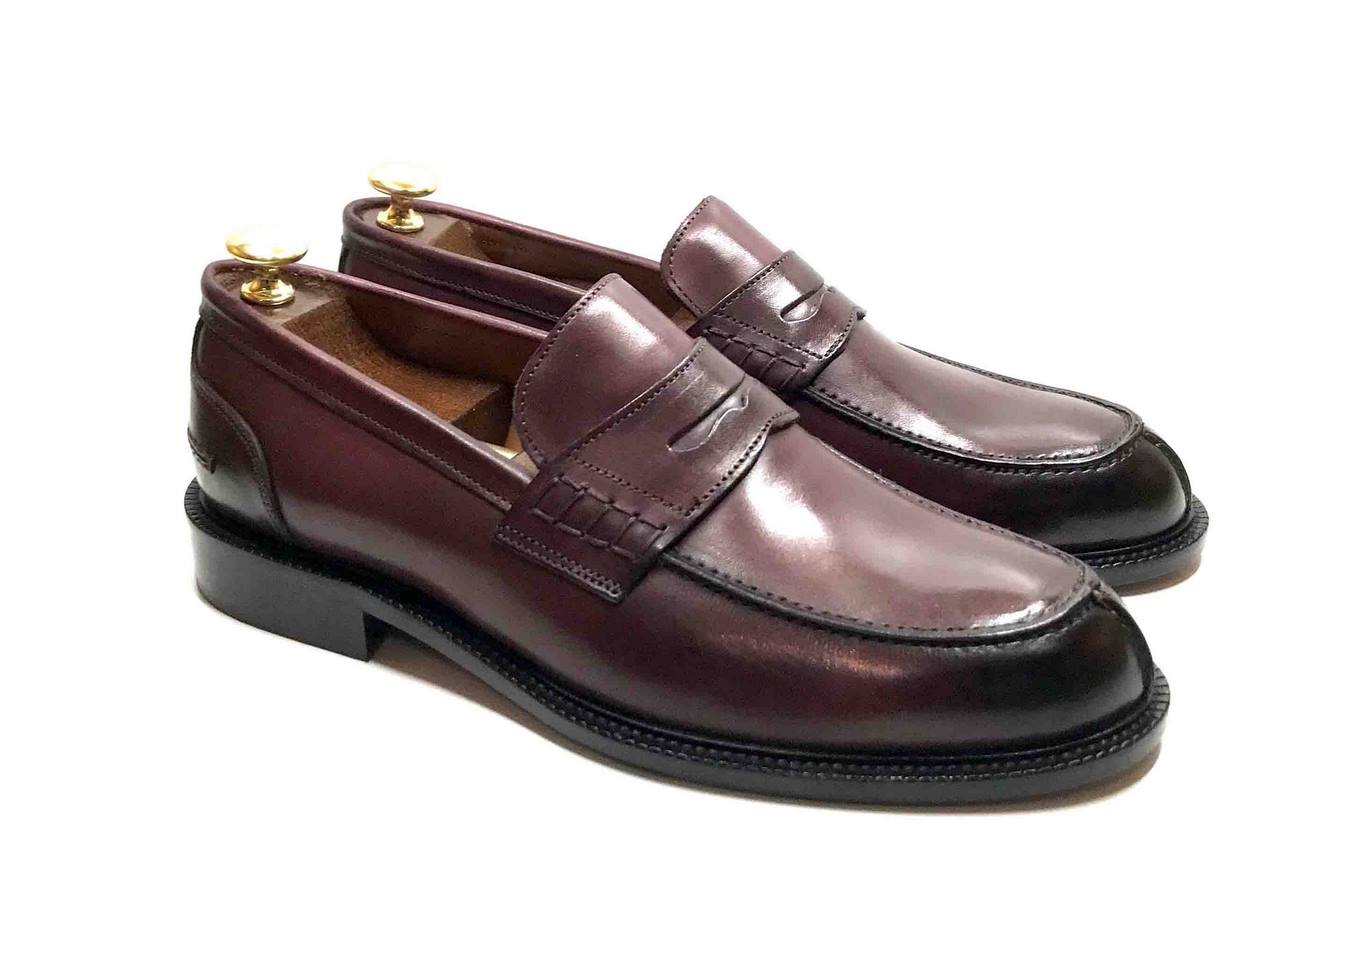 Penny loafer "College" in calfskin